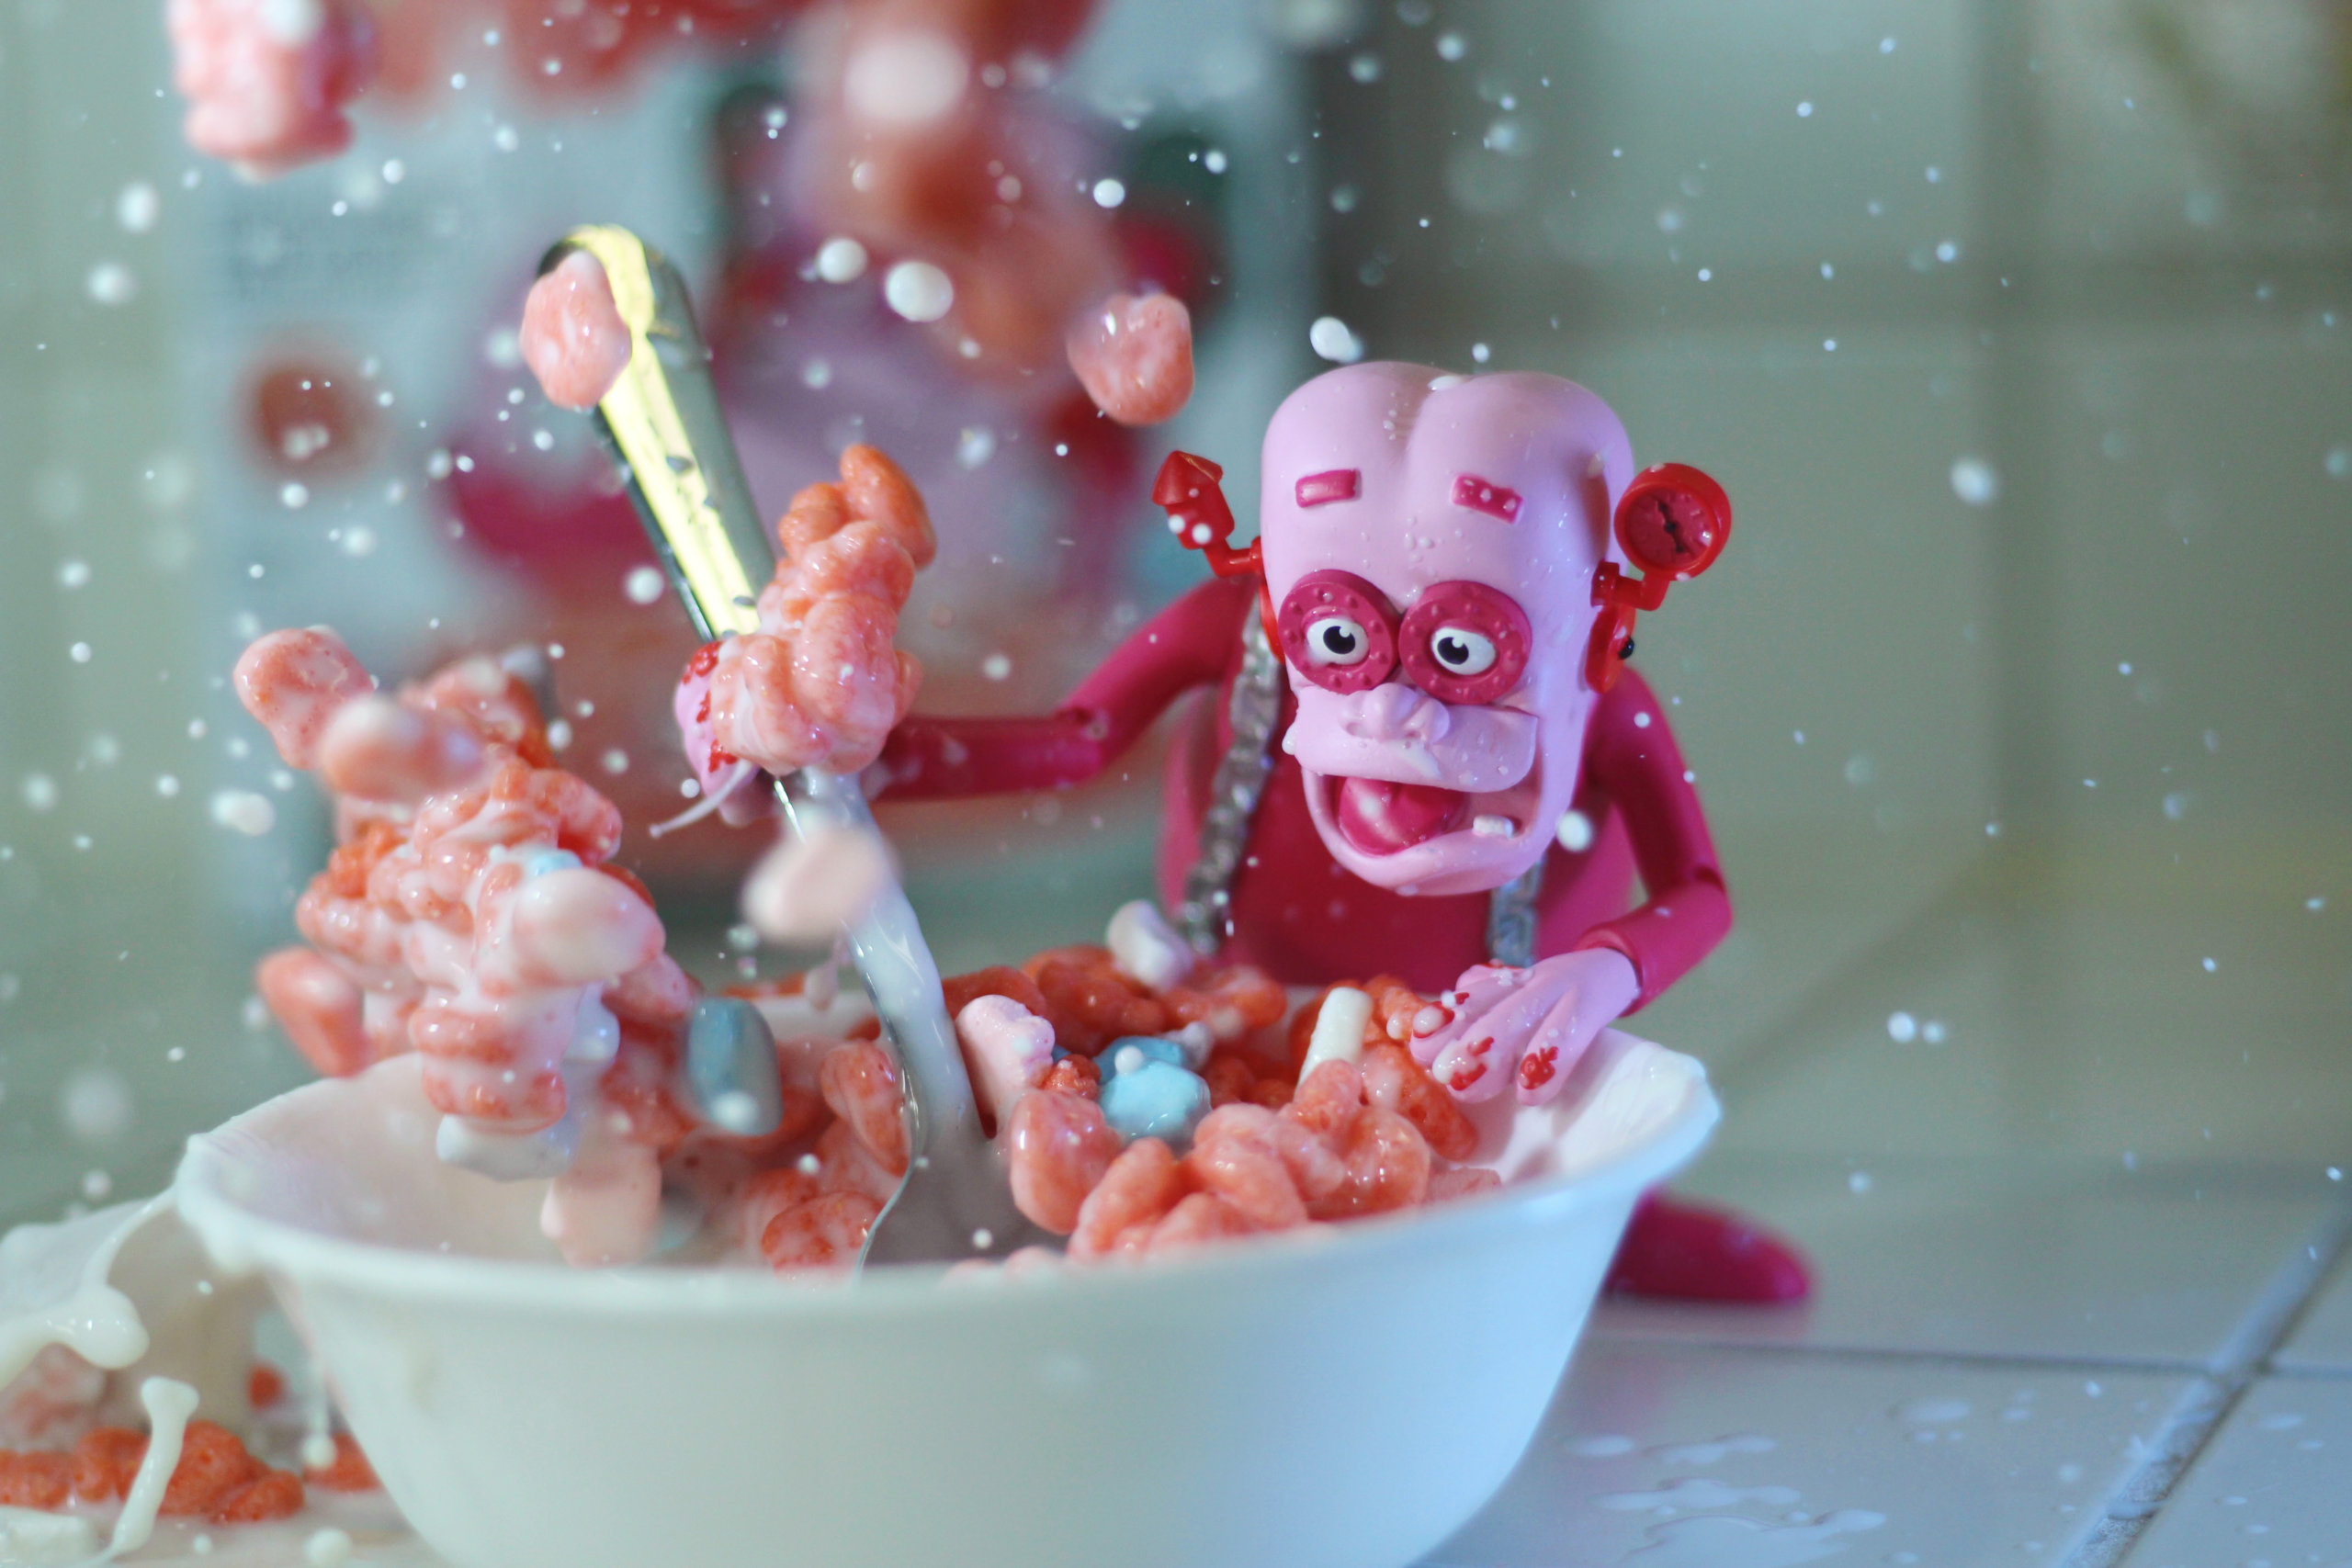 "Frankenberry" by Oliver Peterson